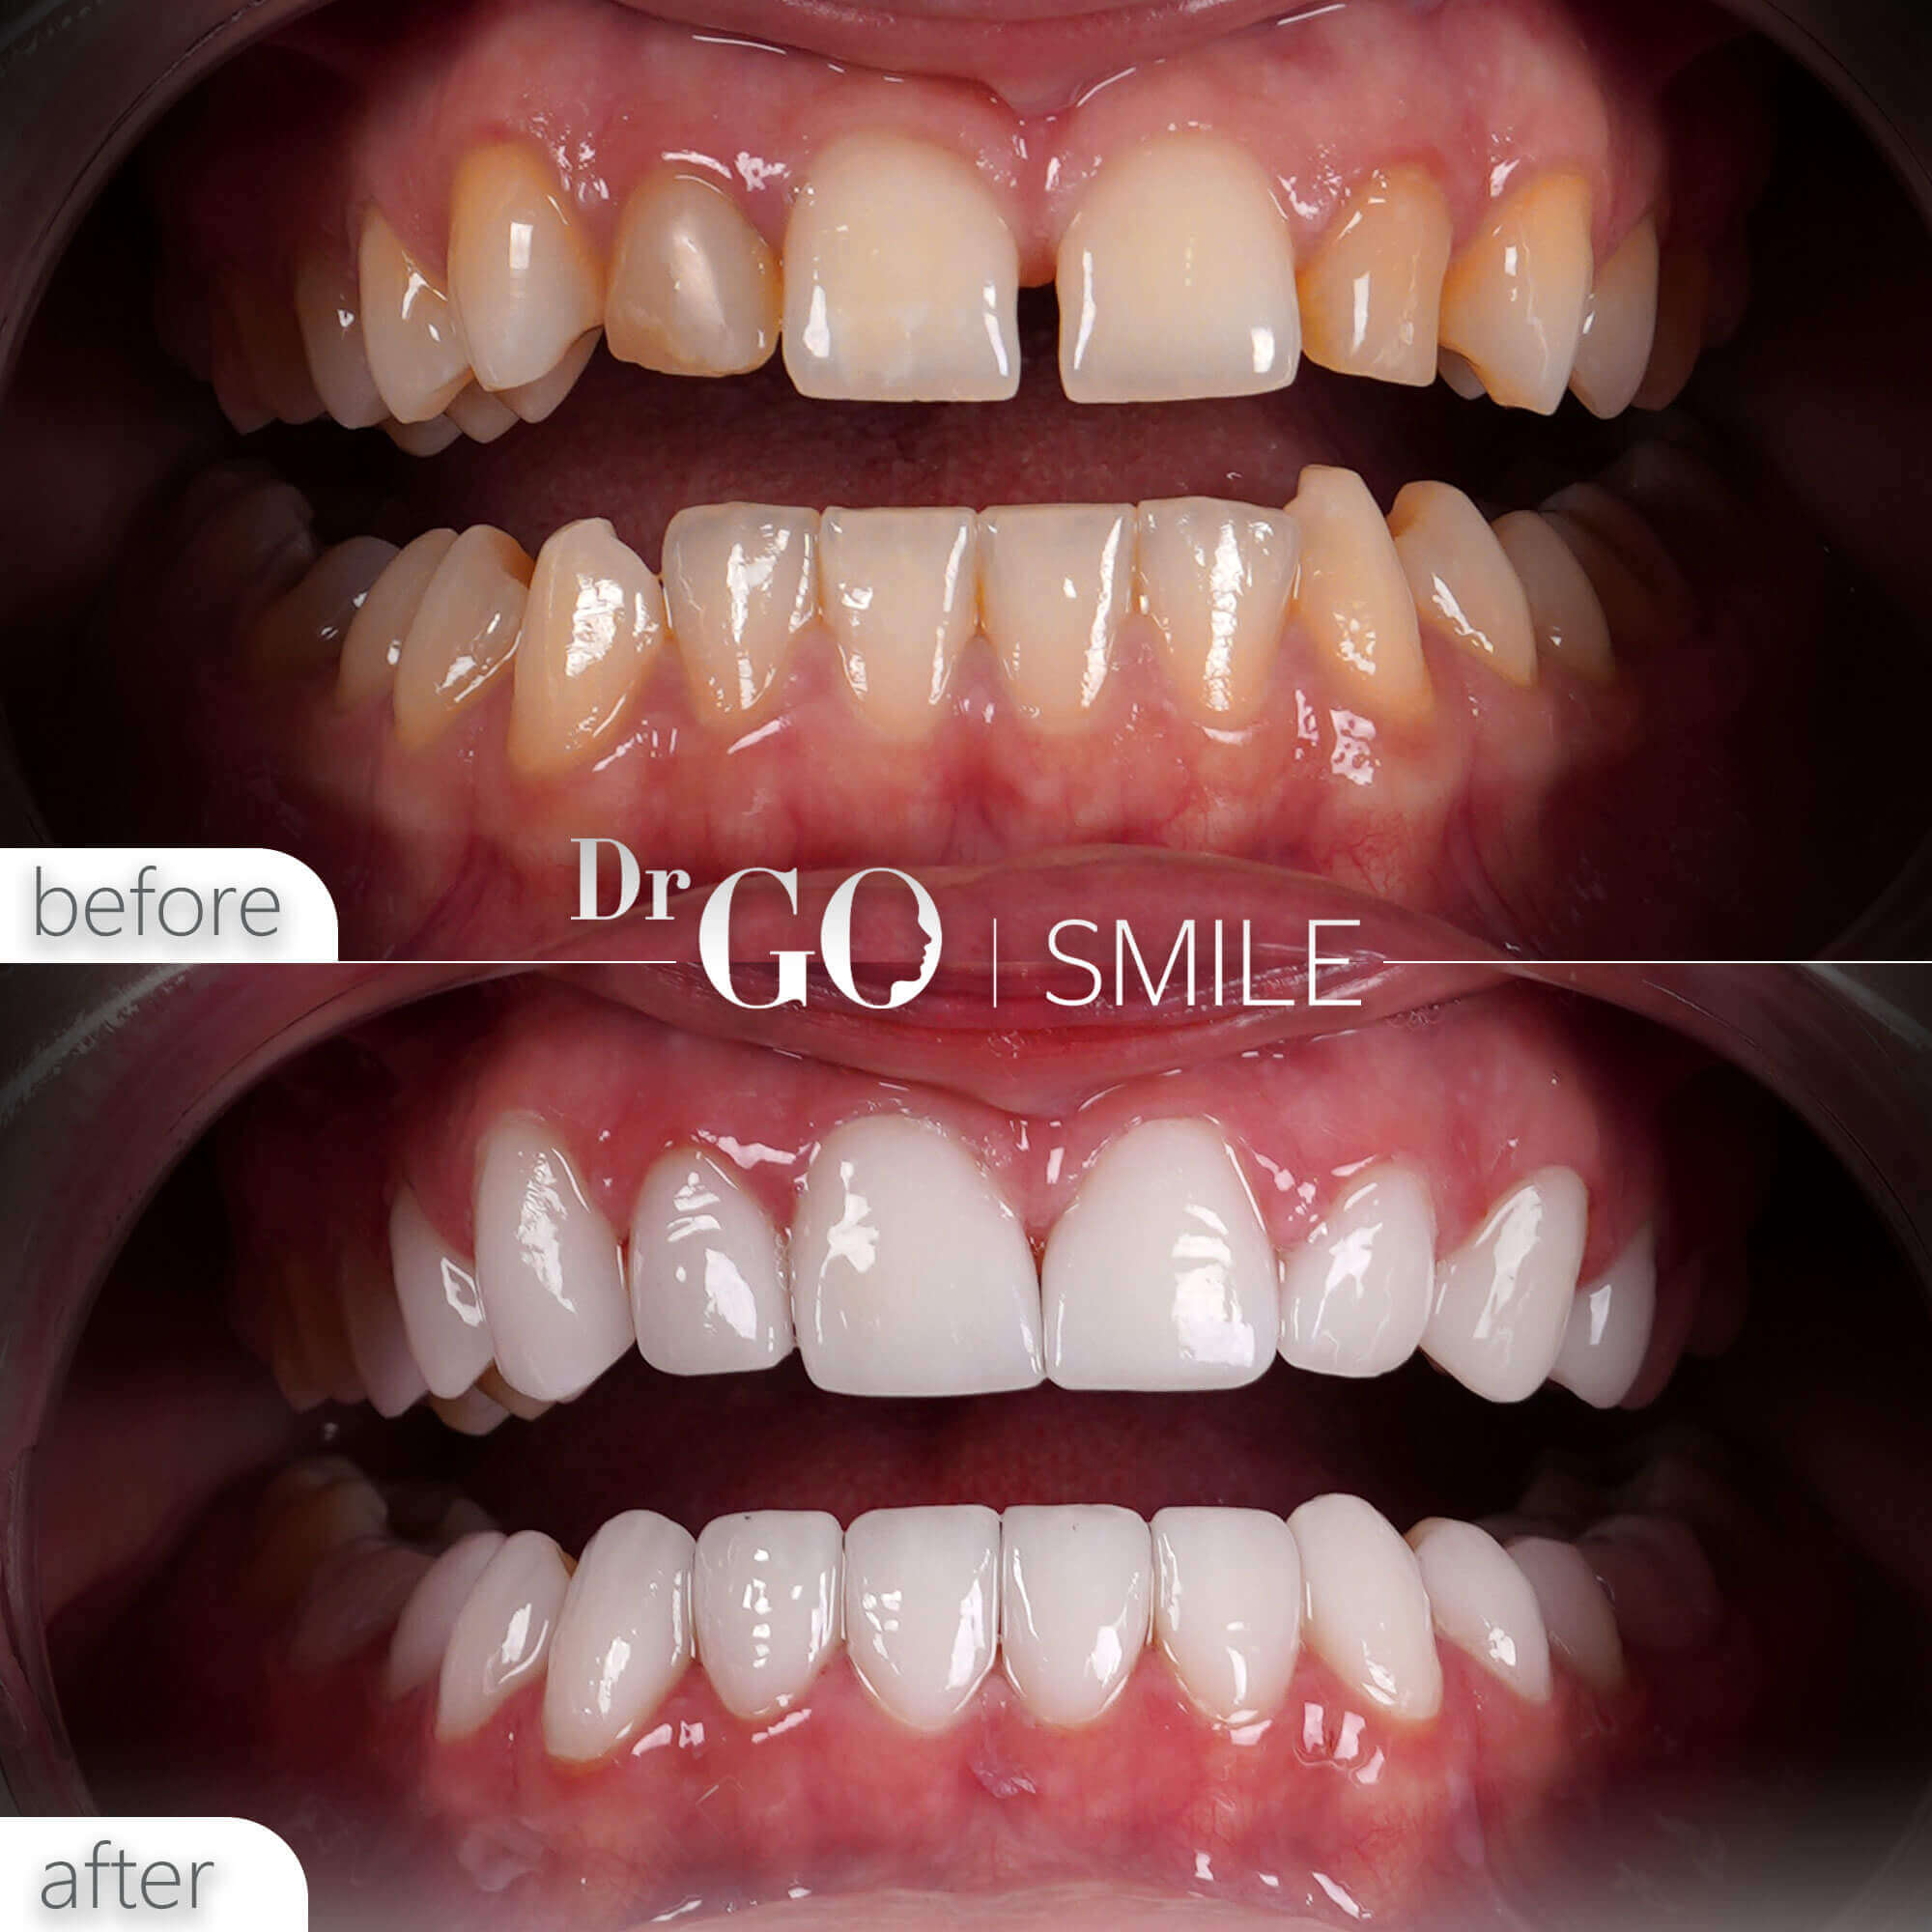 Drgo Smile Before After 3